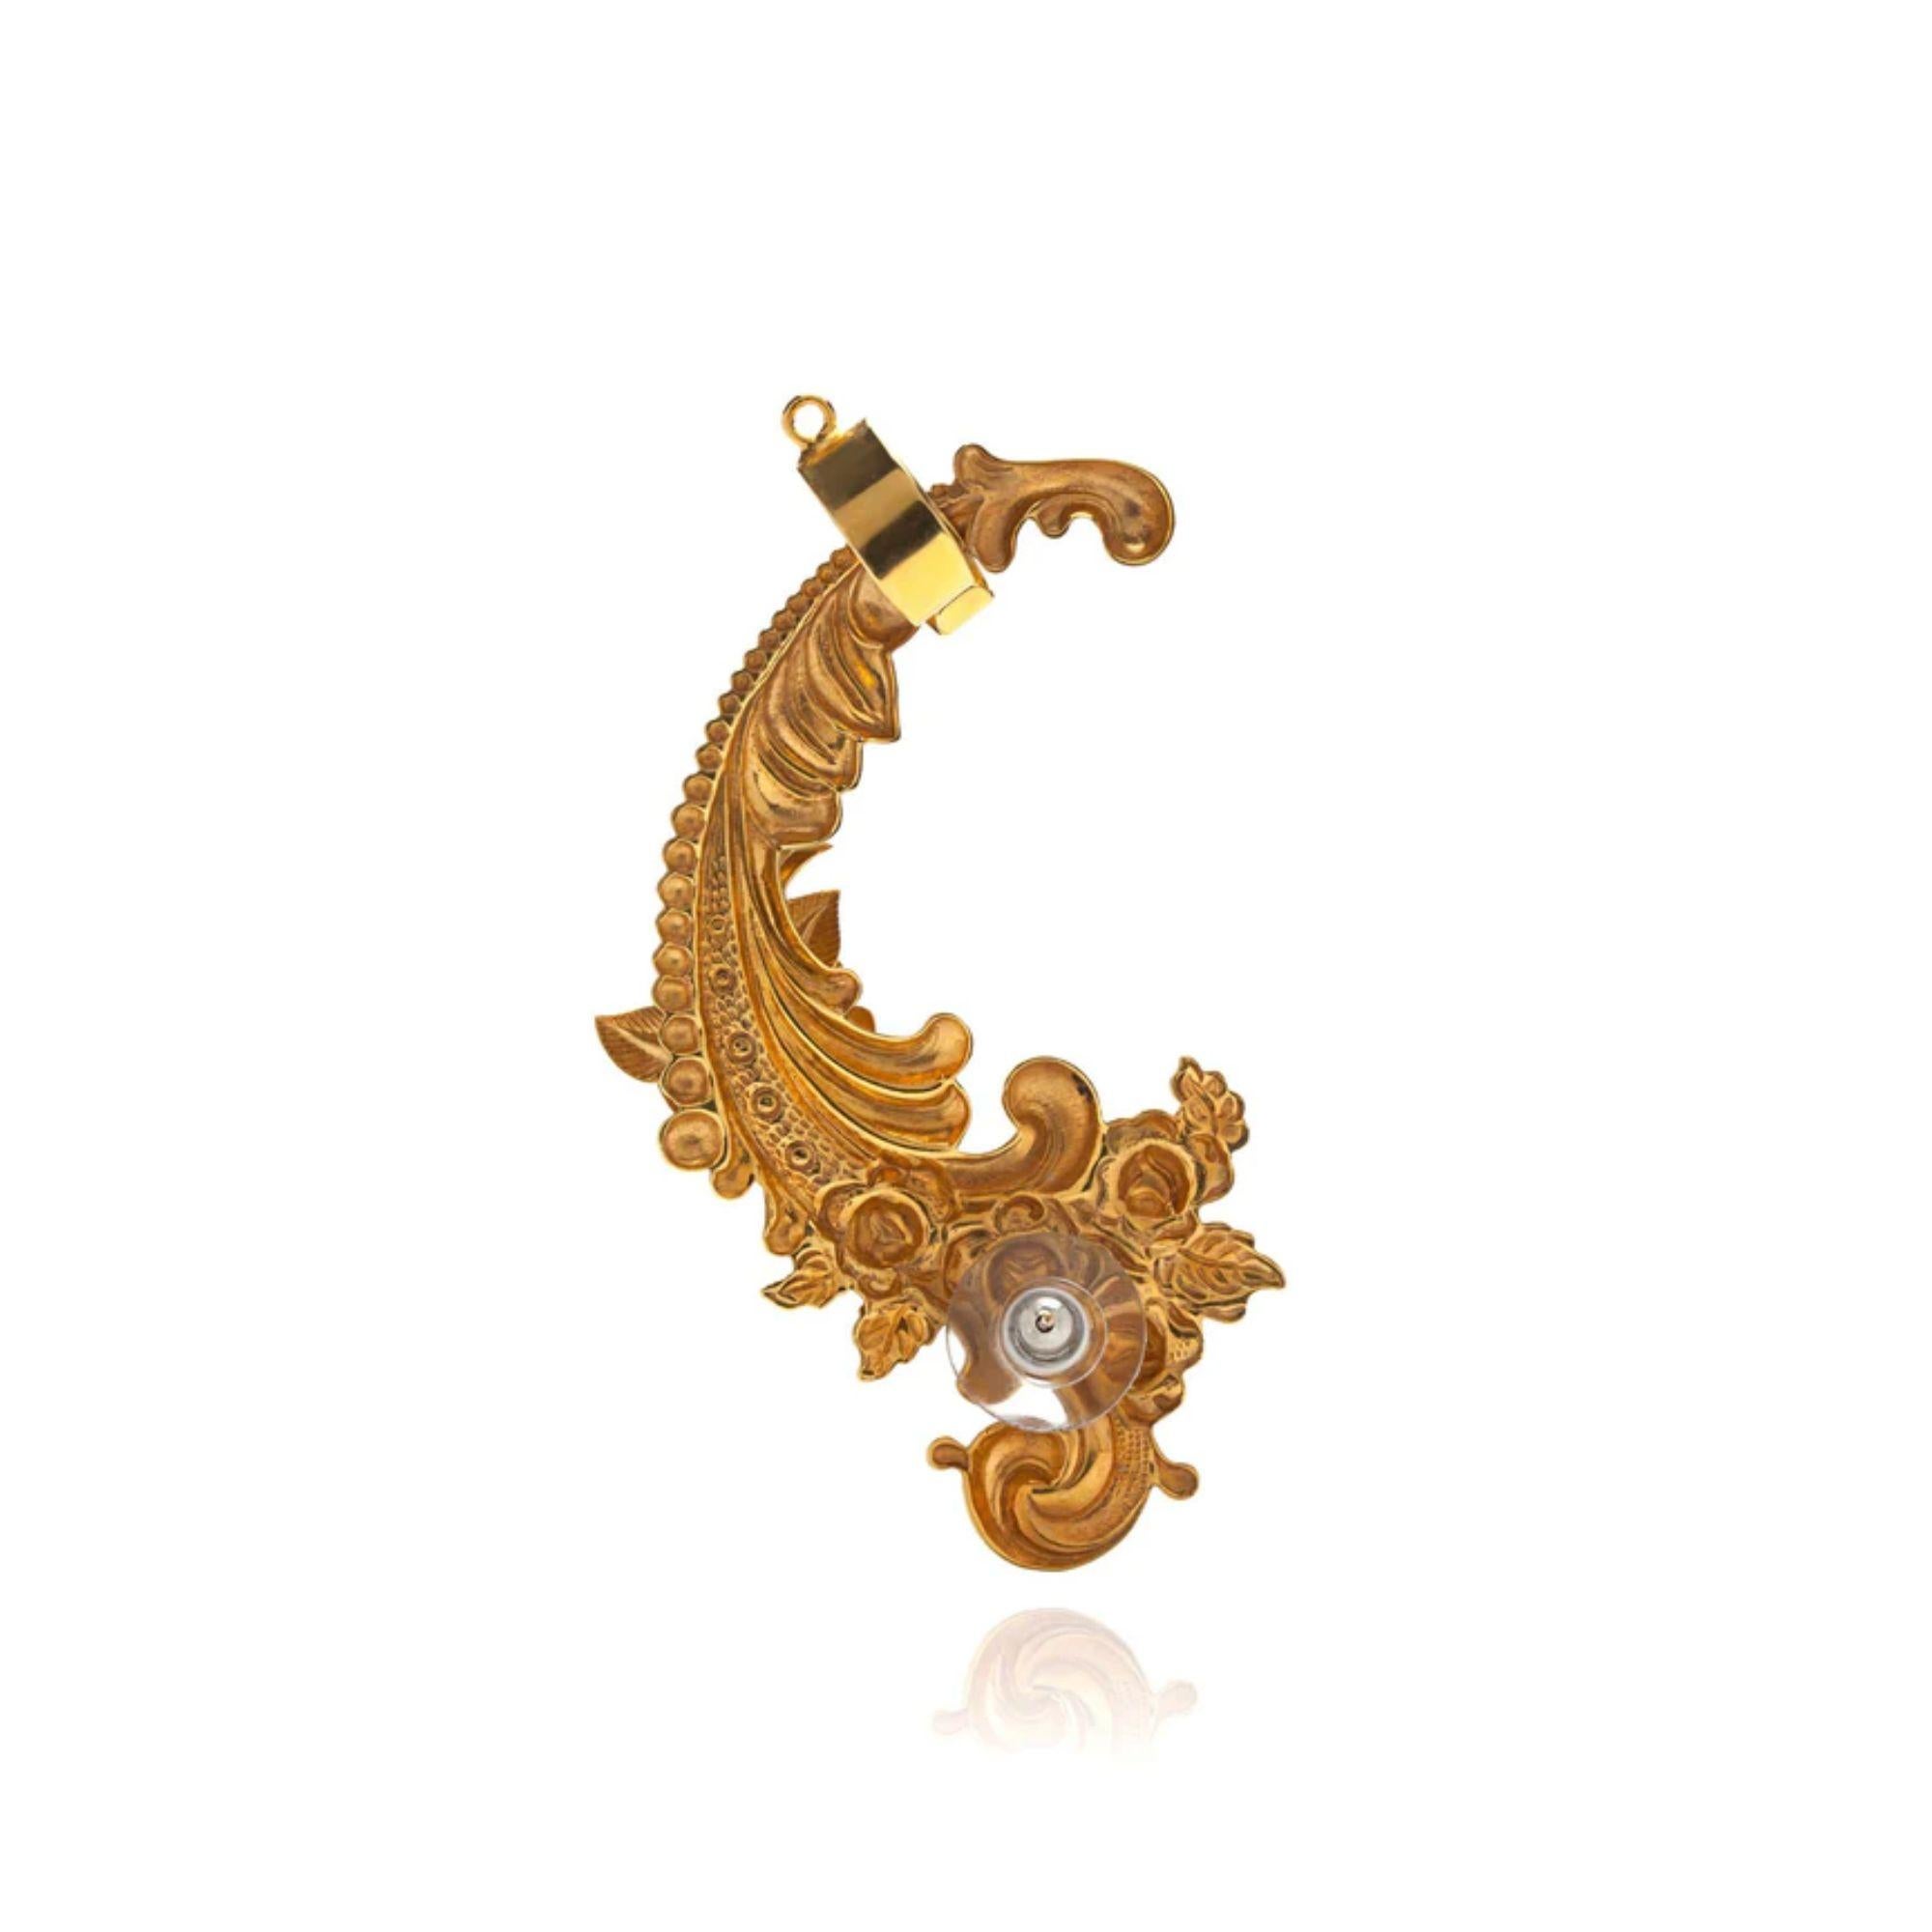 An opulent adornment to your ear. This full baroque fantasy for your ear is a royal upgrade for your auditory organ! In the back you have a stud as well an adjustable earcuff to securely hold up the piece. Made in America. Plated on